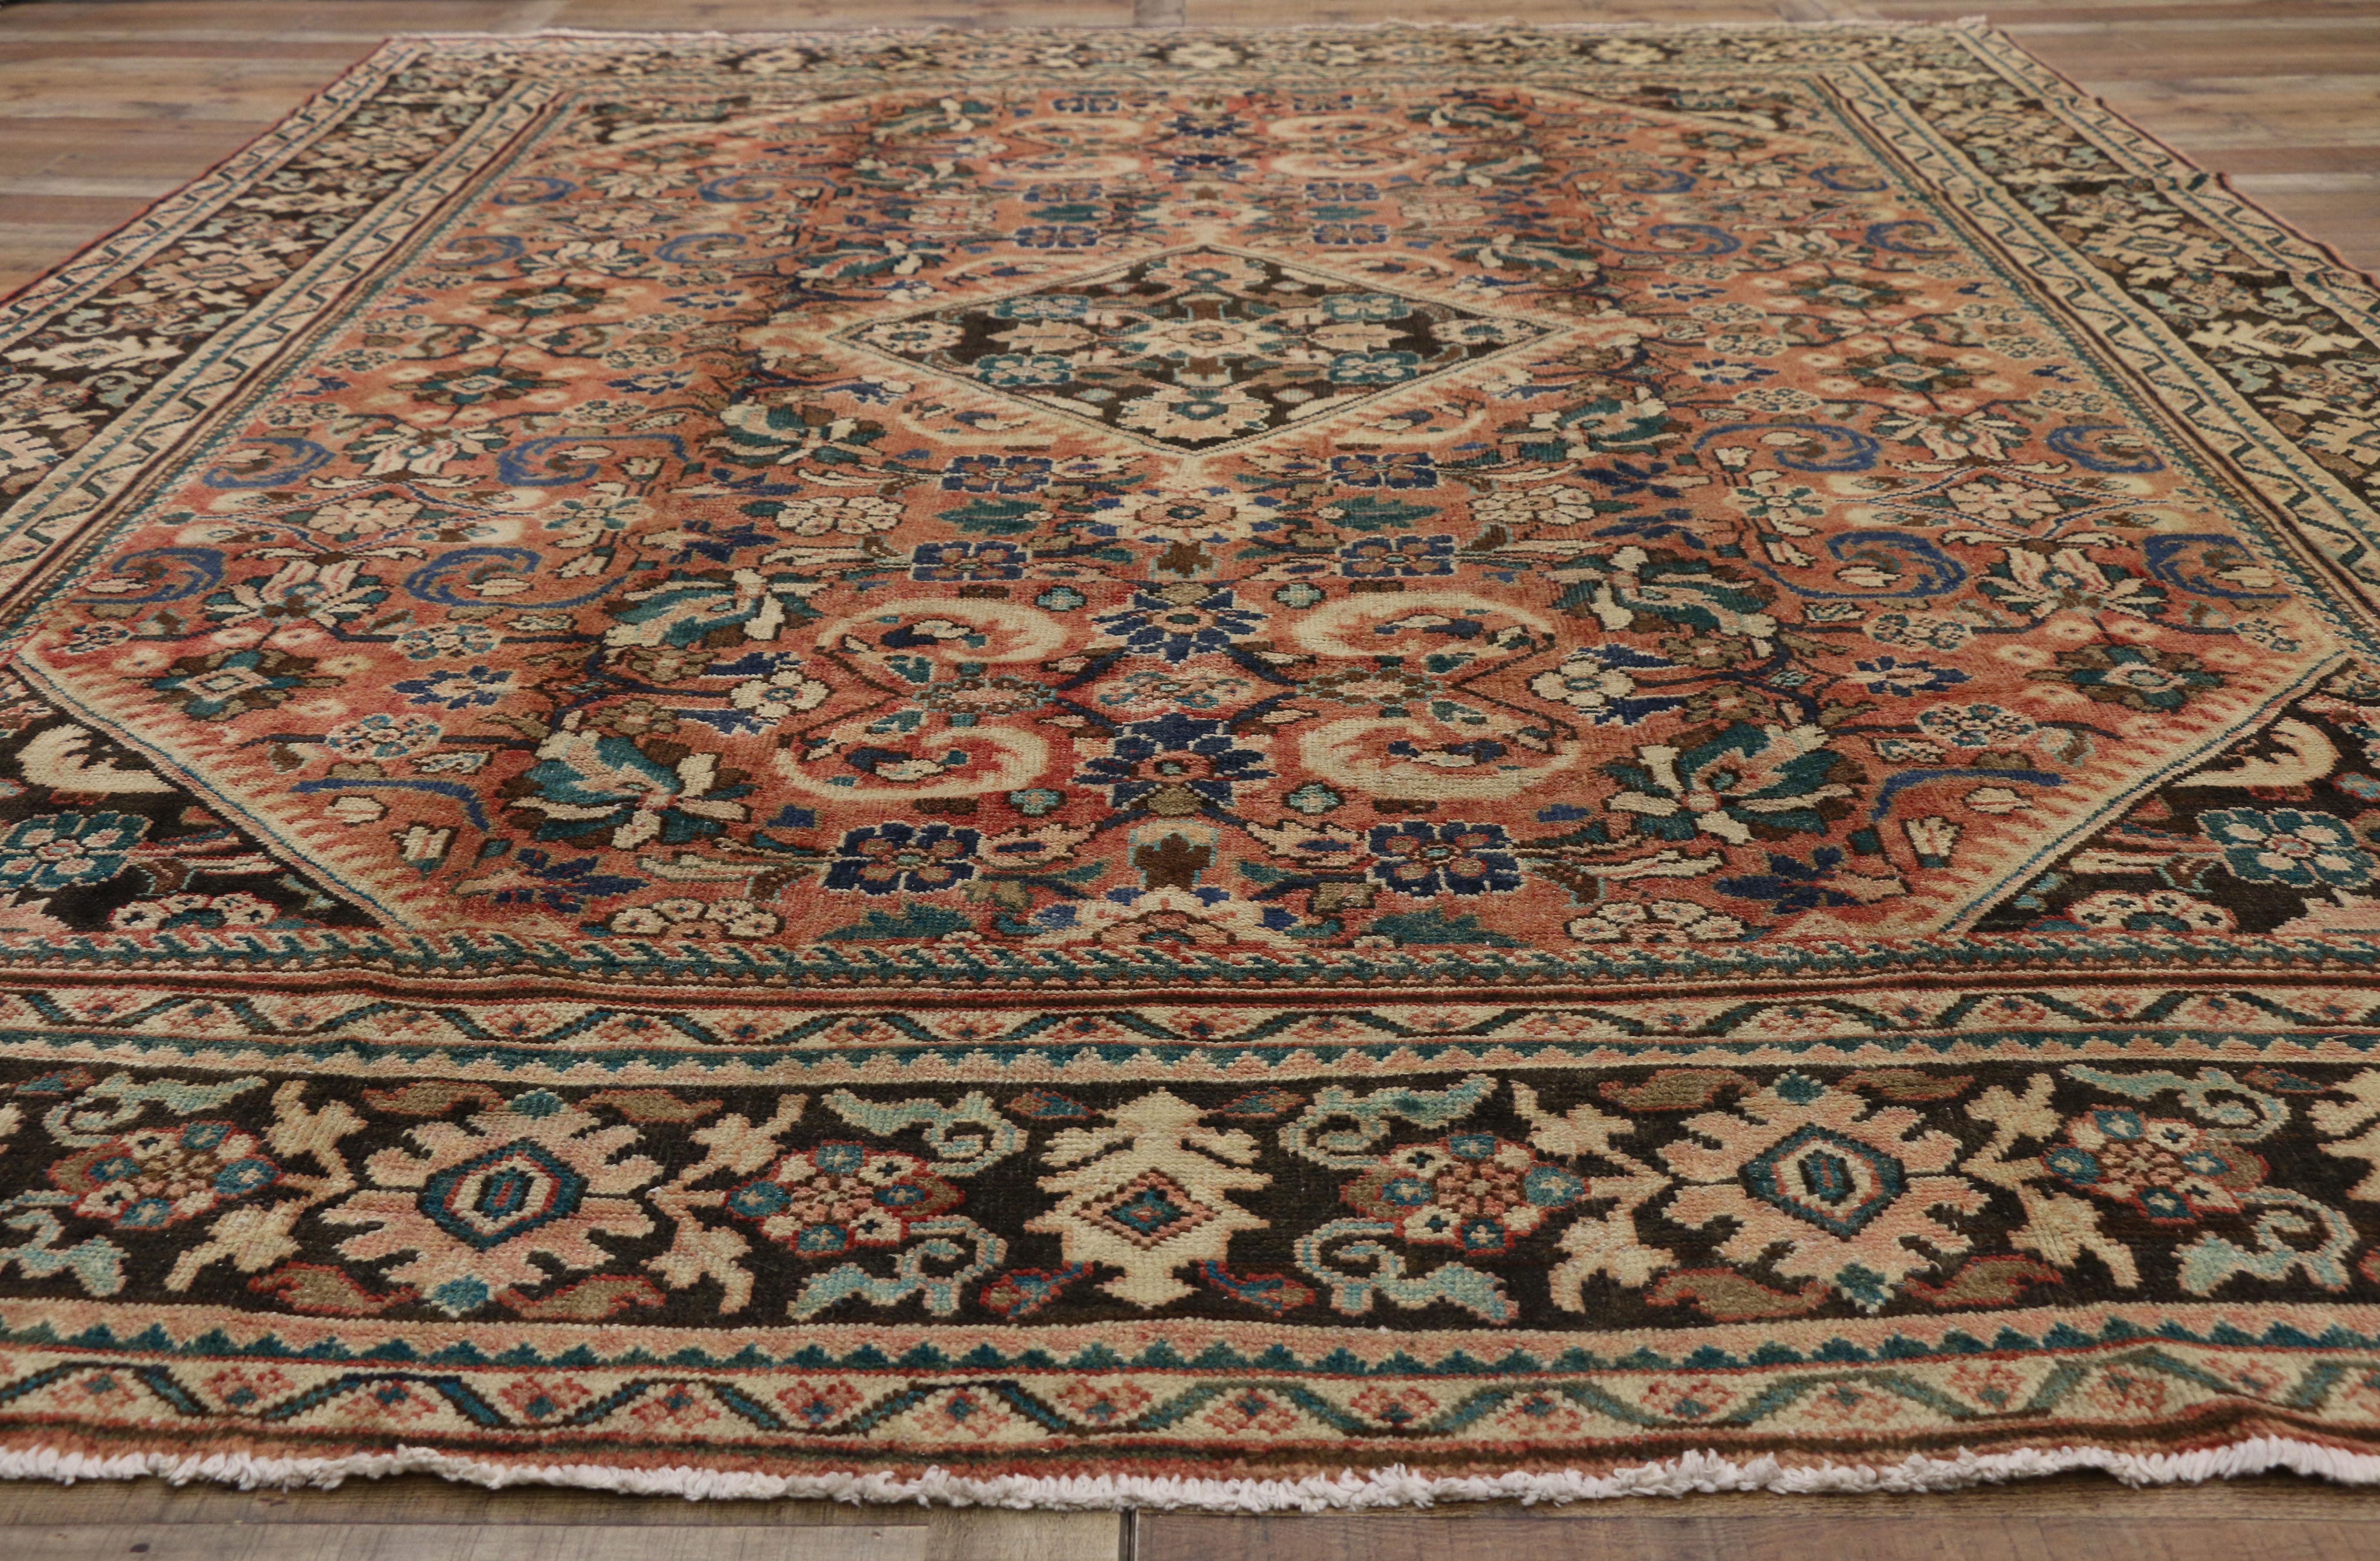 Wool Antique Persian Mahal Rug with Arts & Crafts Style